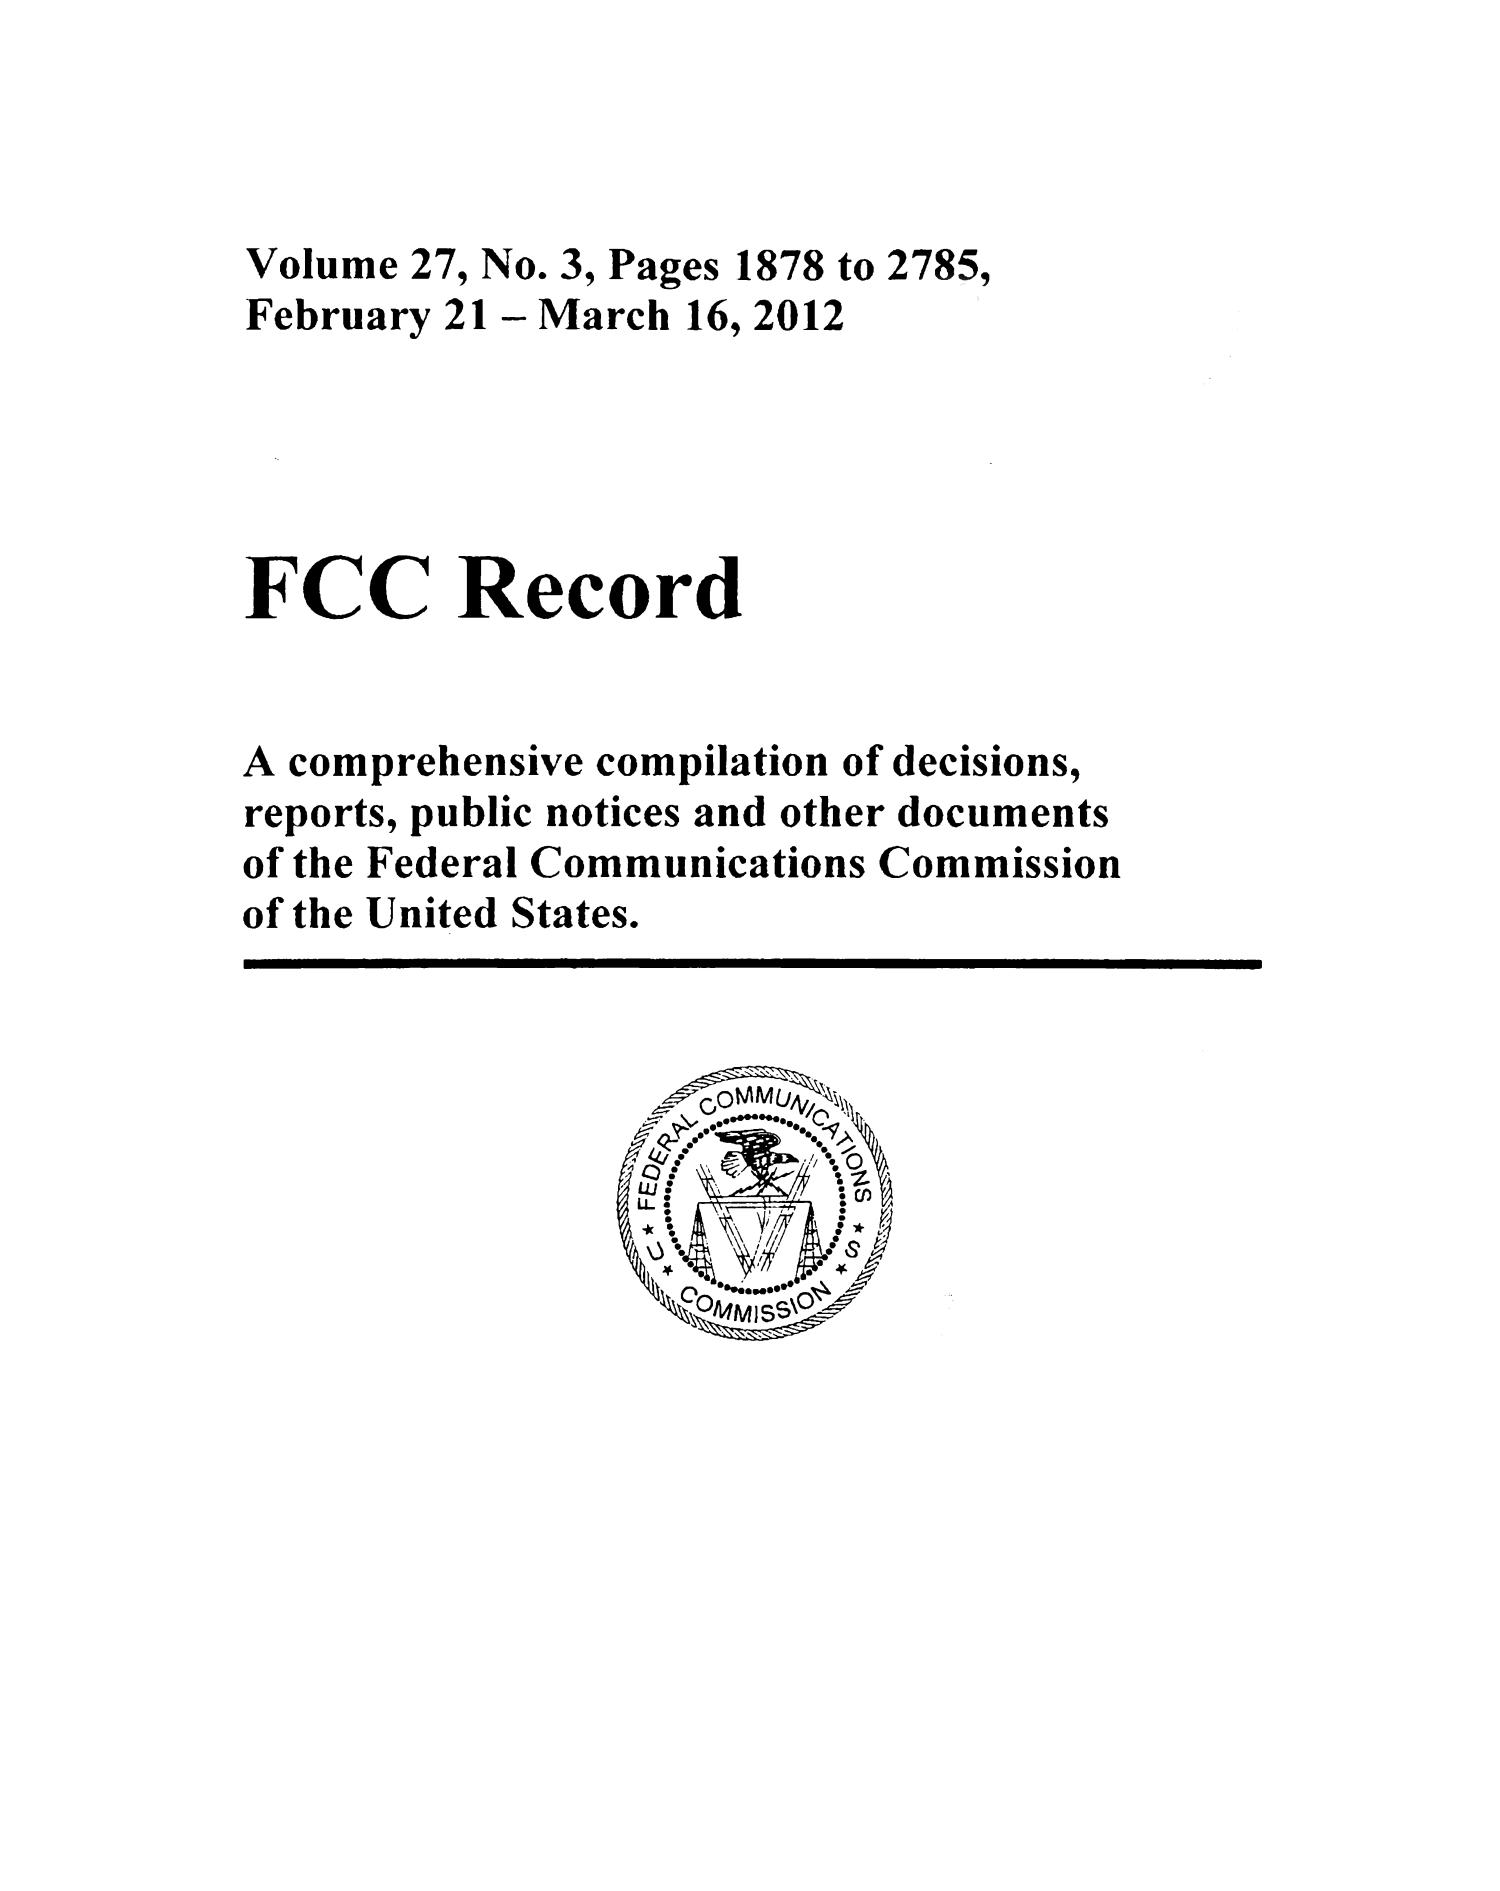 FCC Record, Volume 27, No. 3, Pages 1878 to 2785, February 21 - March 16, 2012
                                                
                                                    Front Cover
                                                